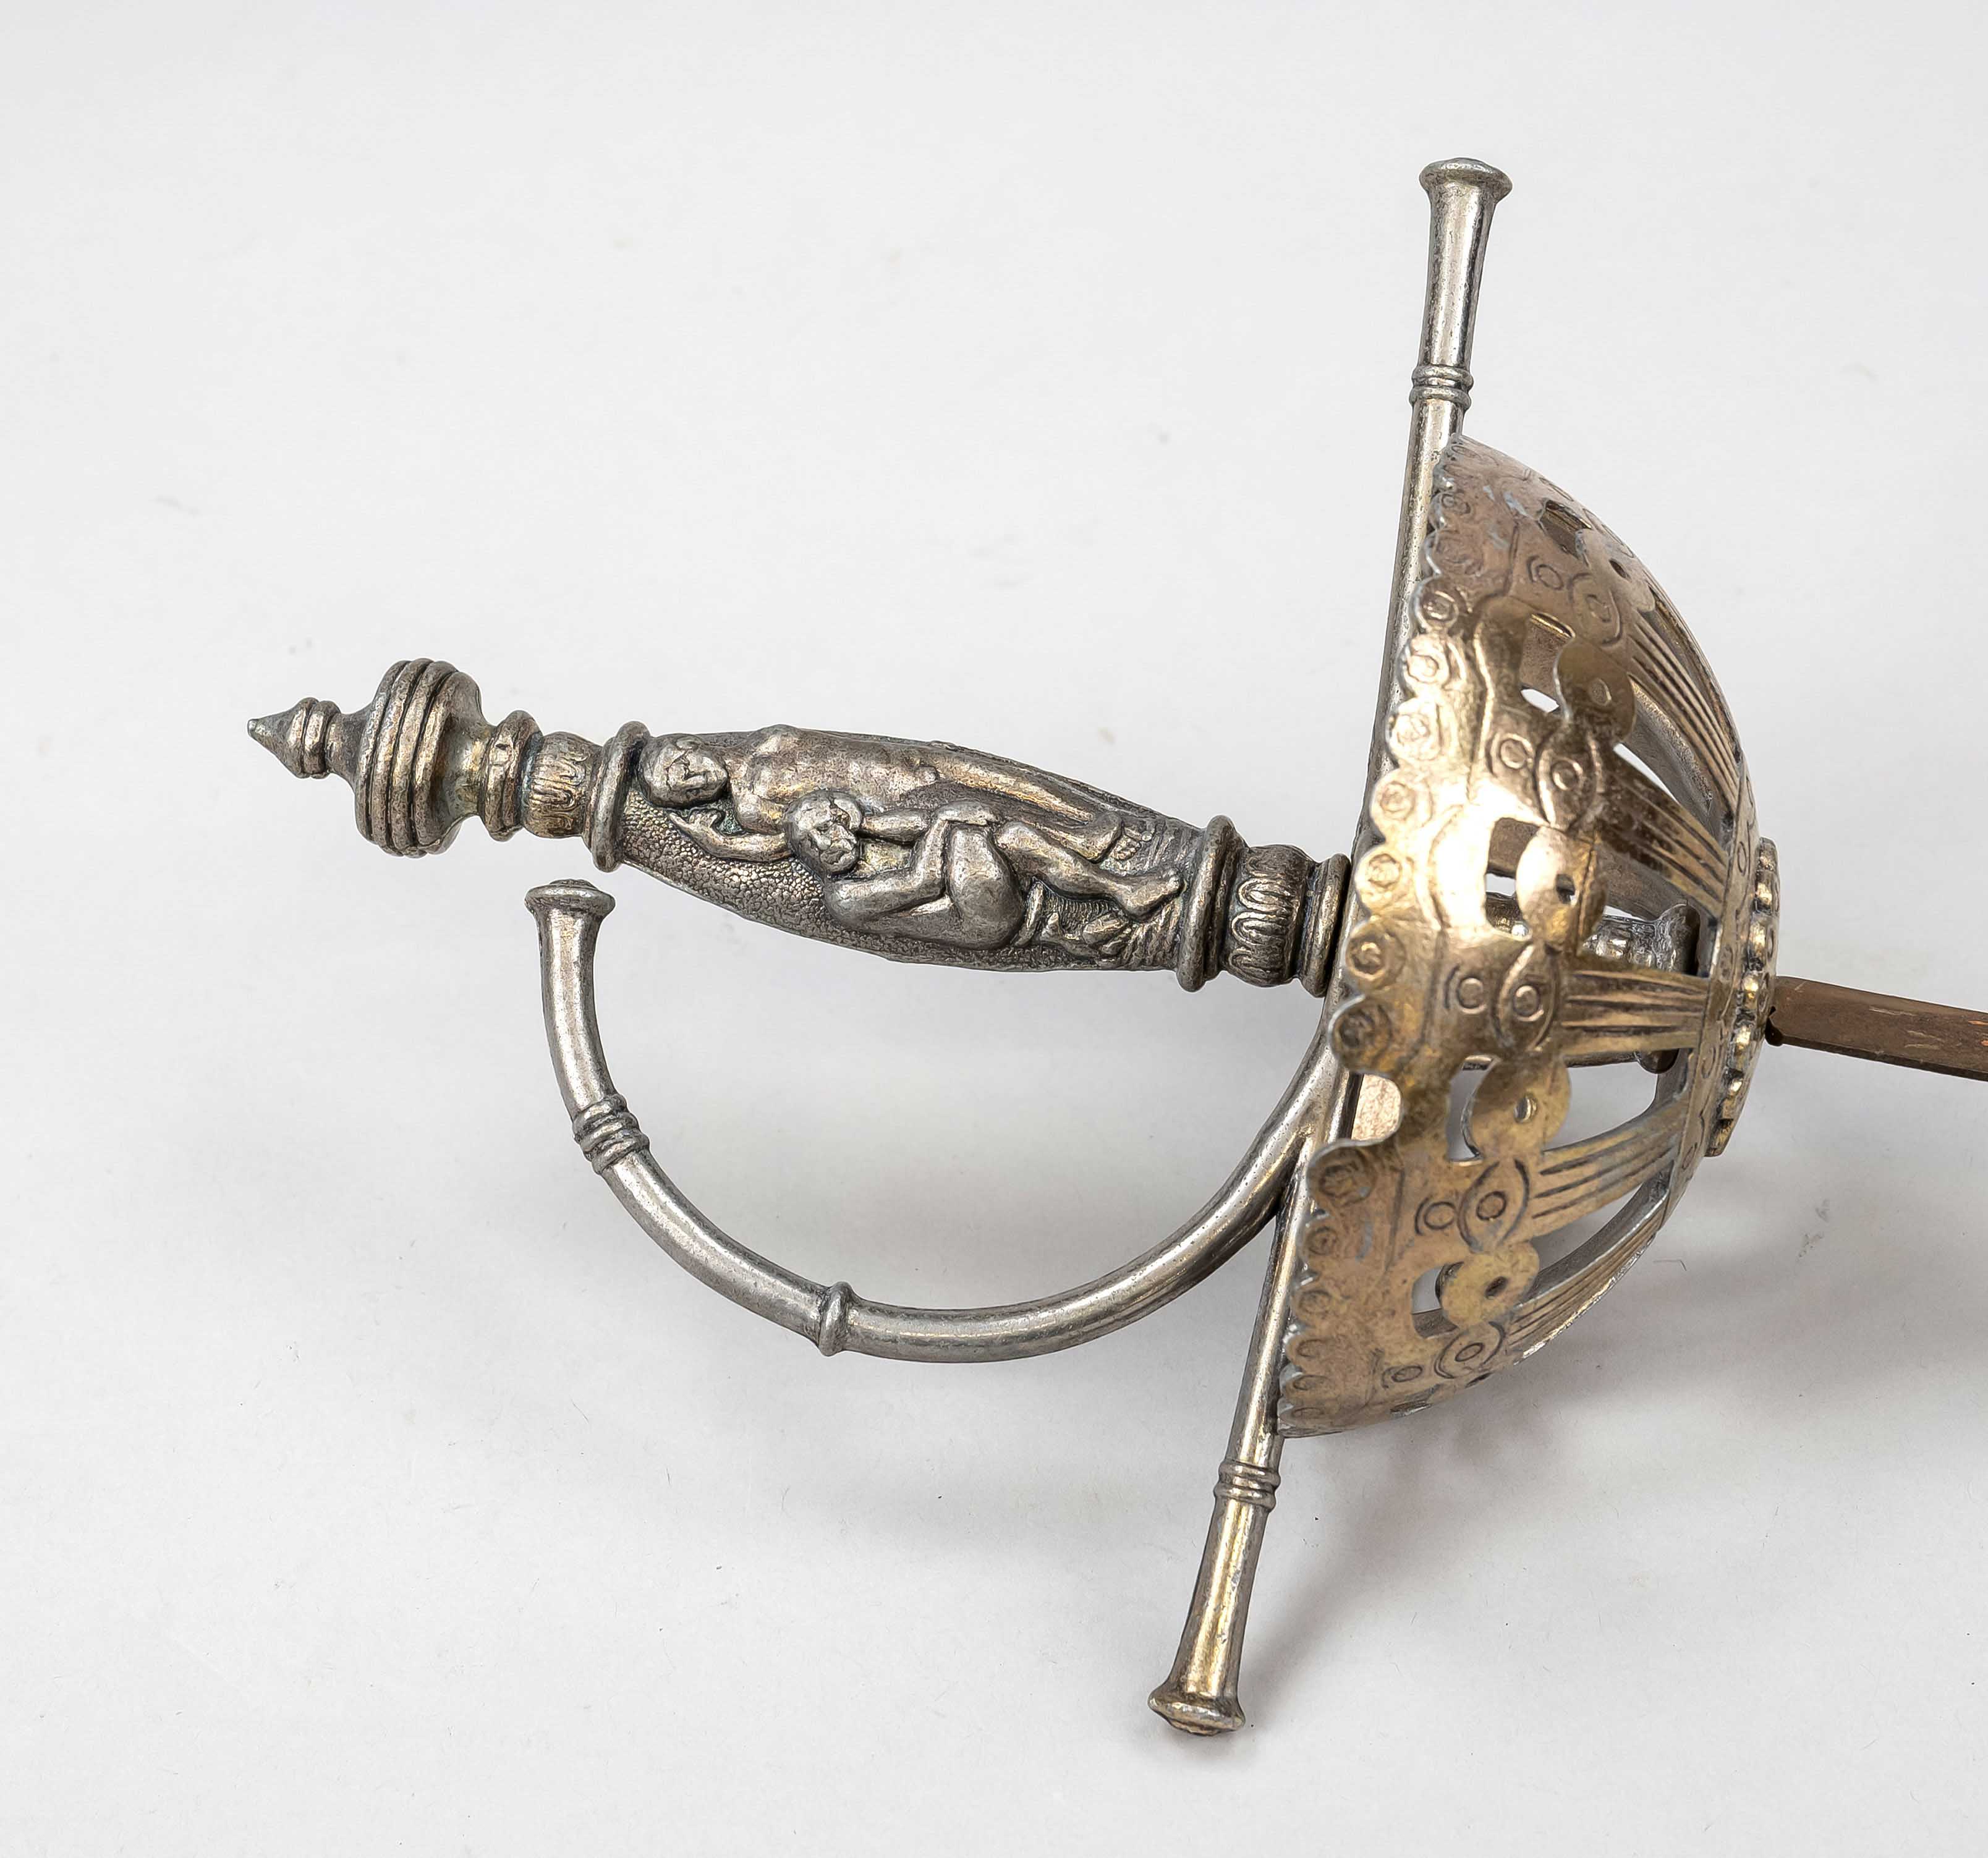 Rapier, 2nd half 20th century, metal. Replica of a bell cup rapier in 17th century style, the - Image 2 of 2